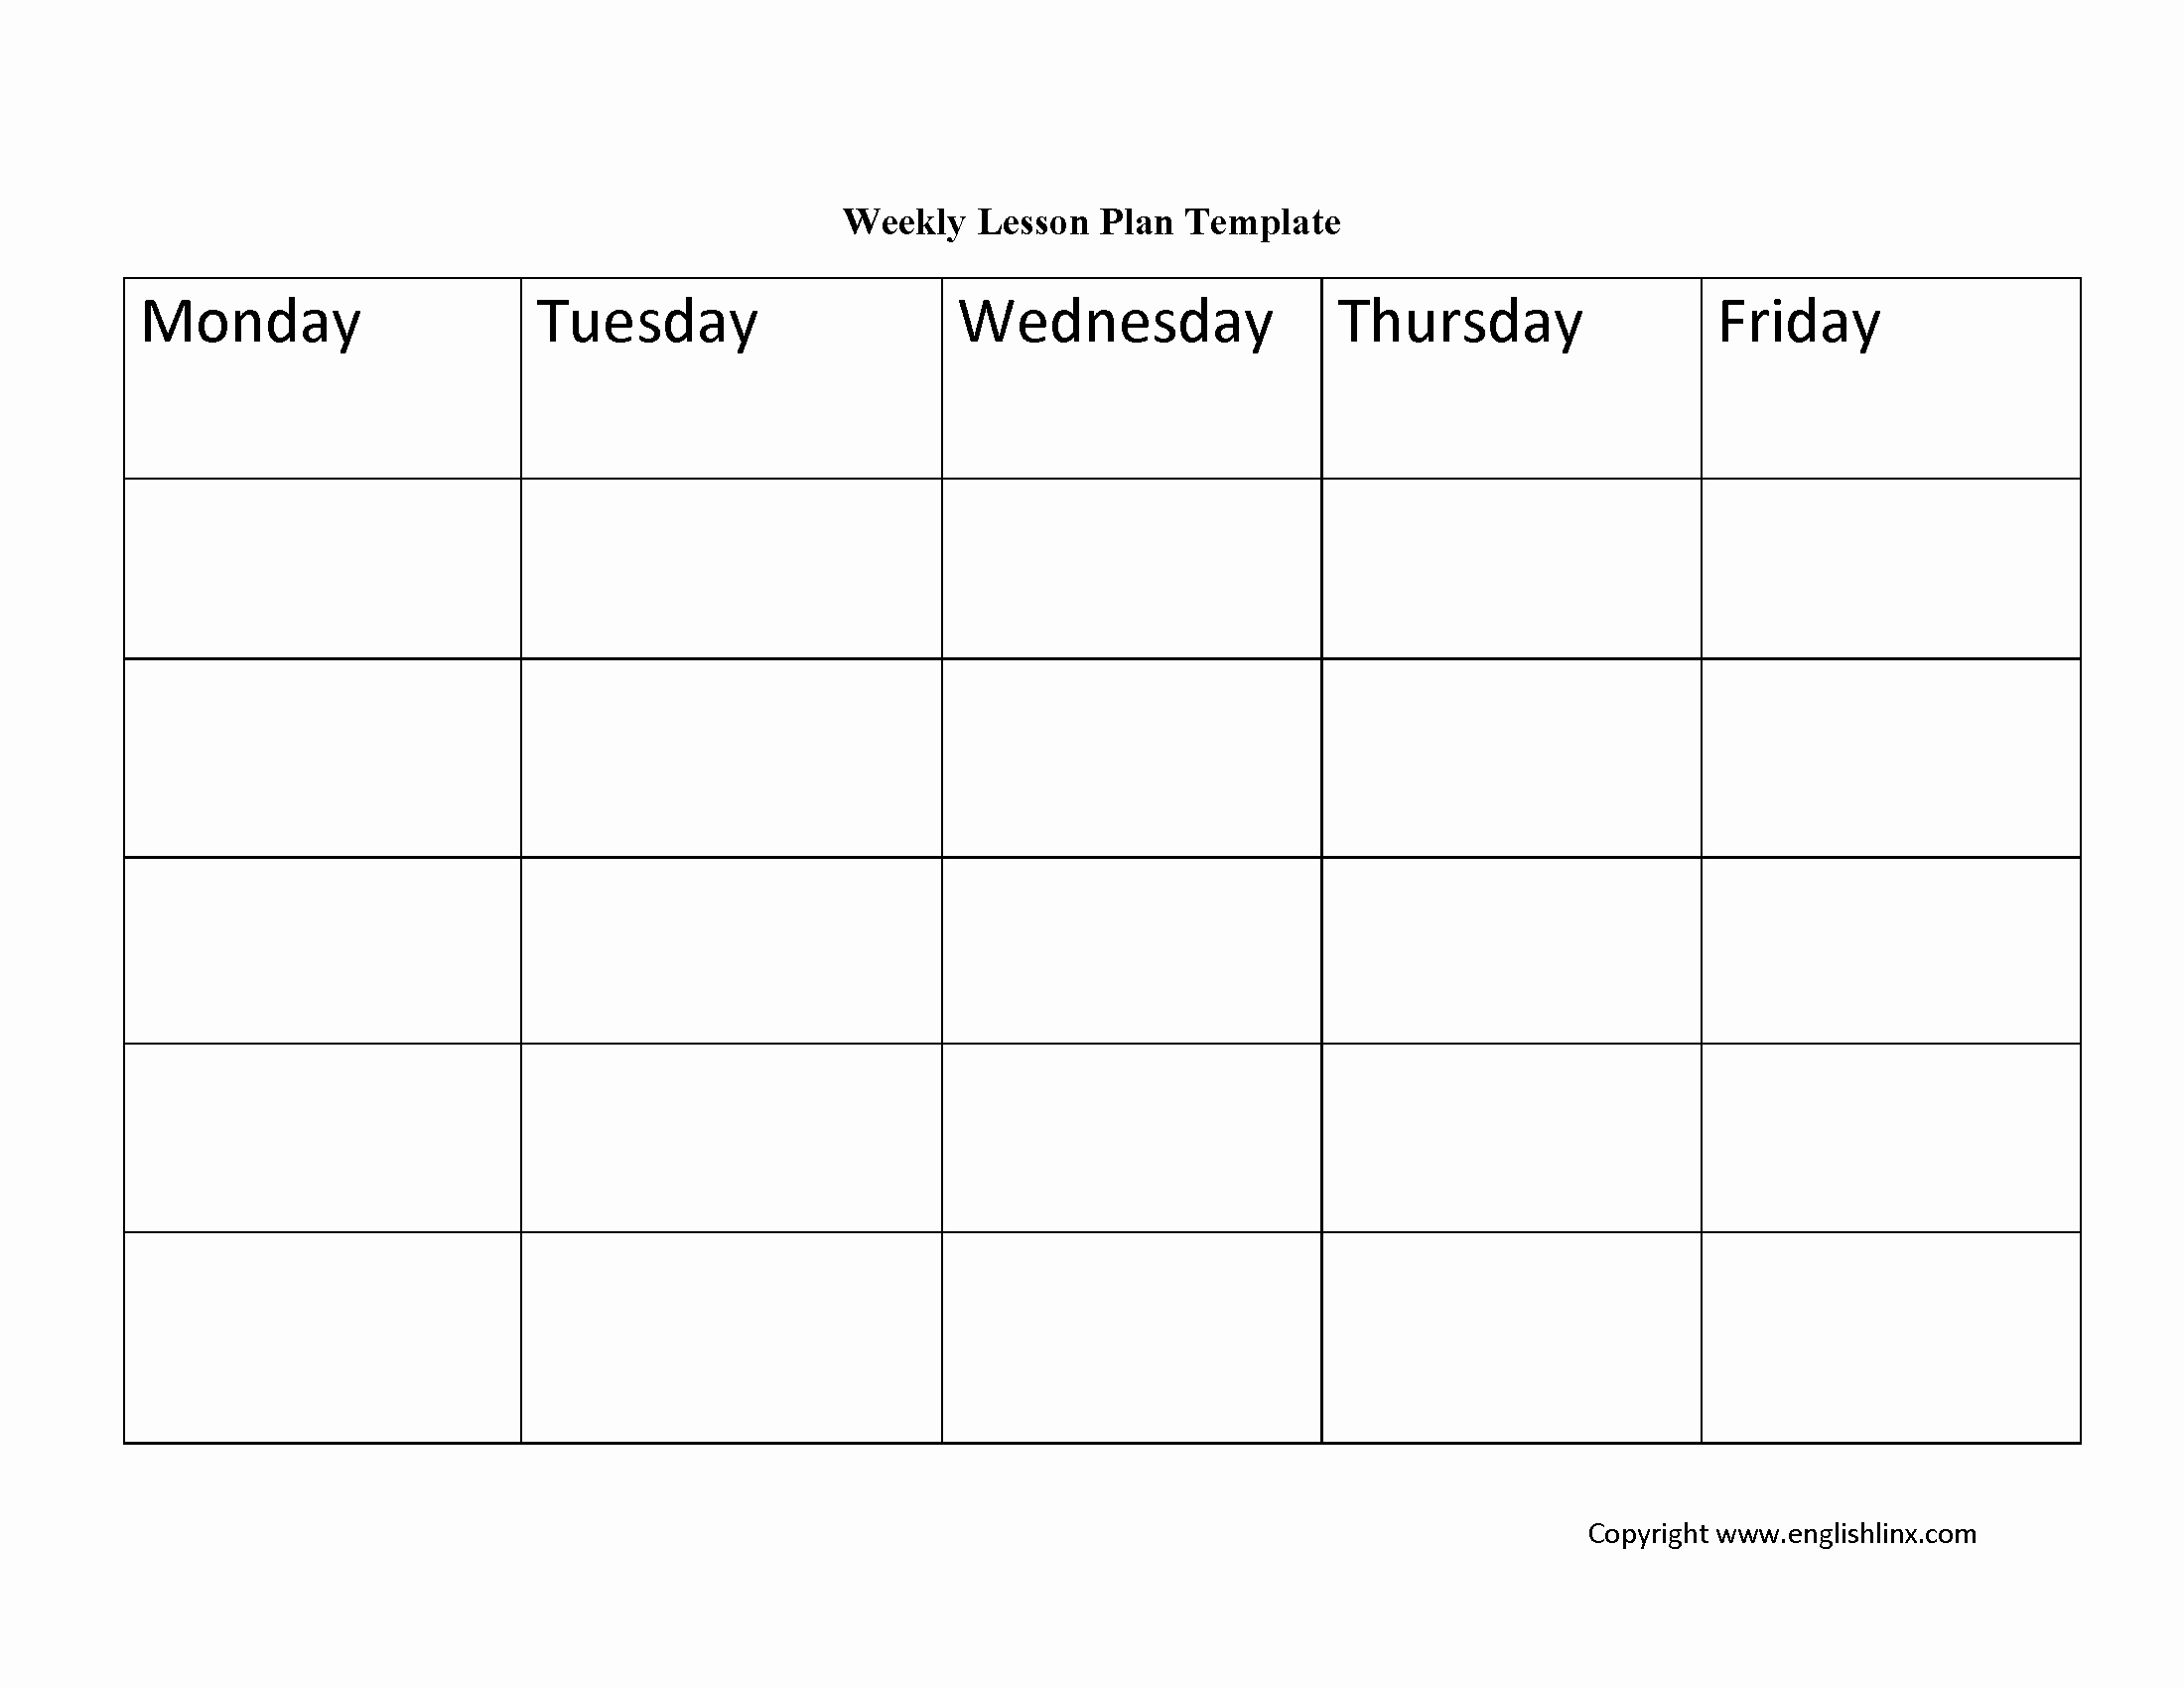 Weekly Lesson Plan Templates Free Fresh Lesson Plan Template